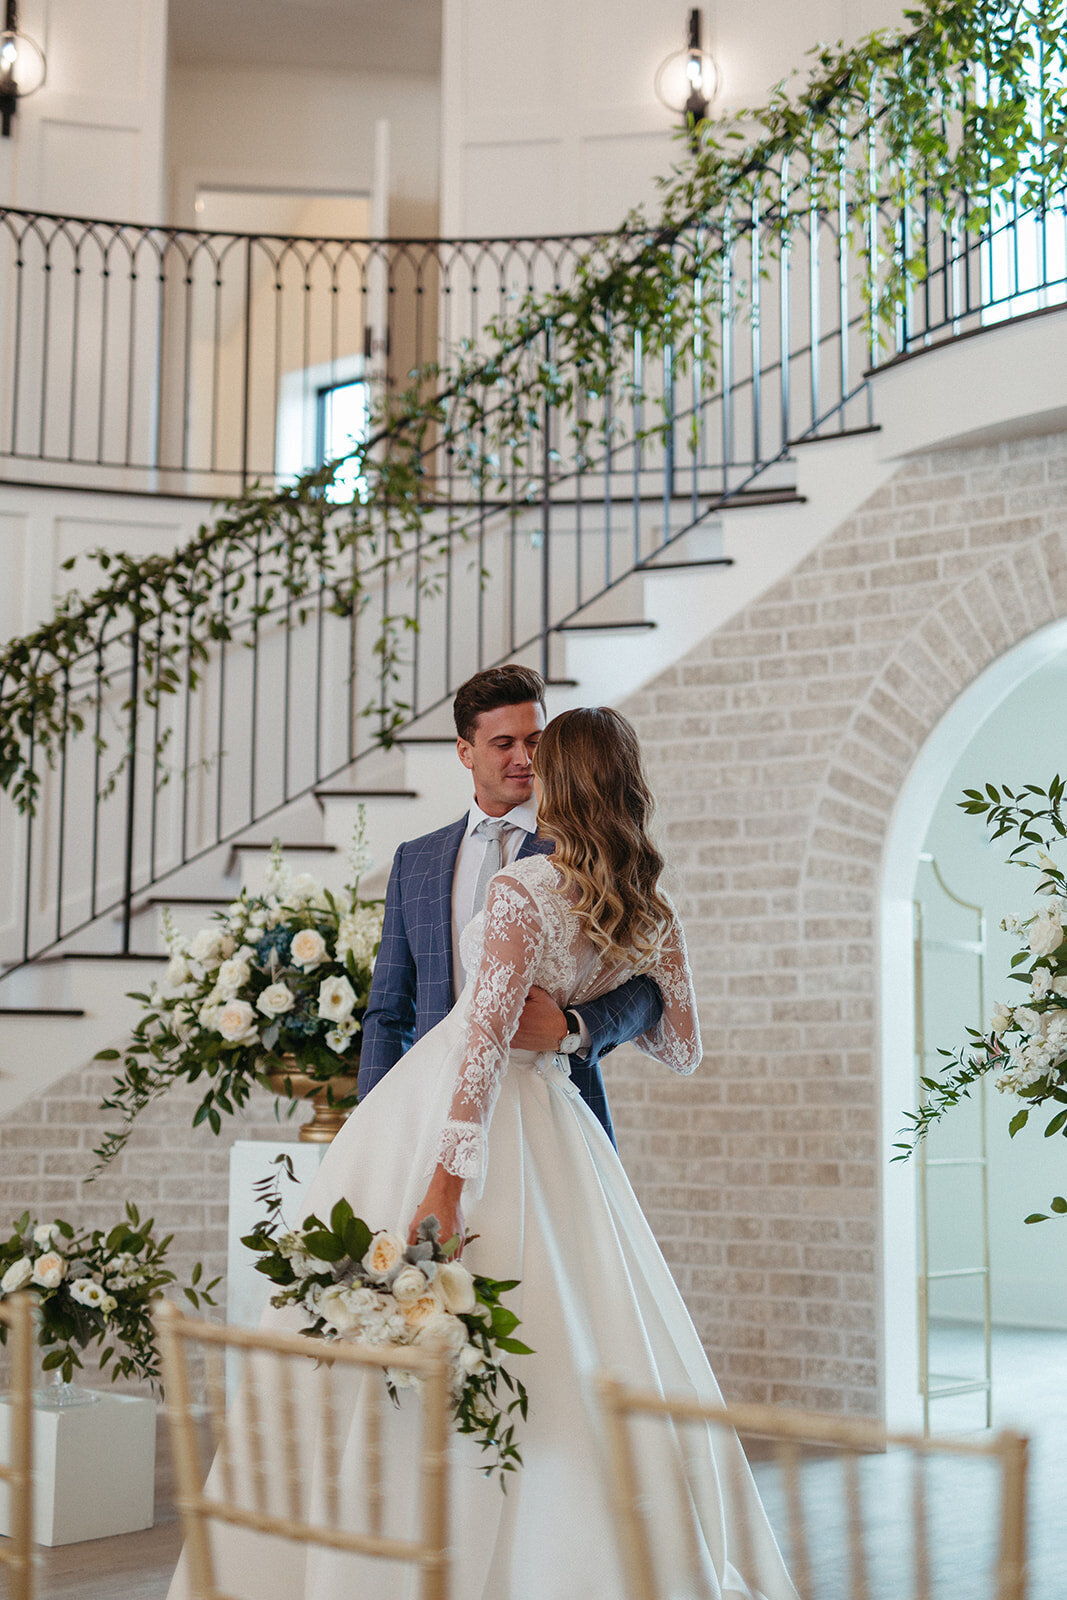 A groom in a blue suit holds bride wearing a white wedding gown and holding a bouquet in front a staircase wrapped in garland.